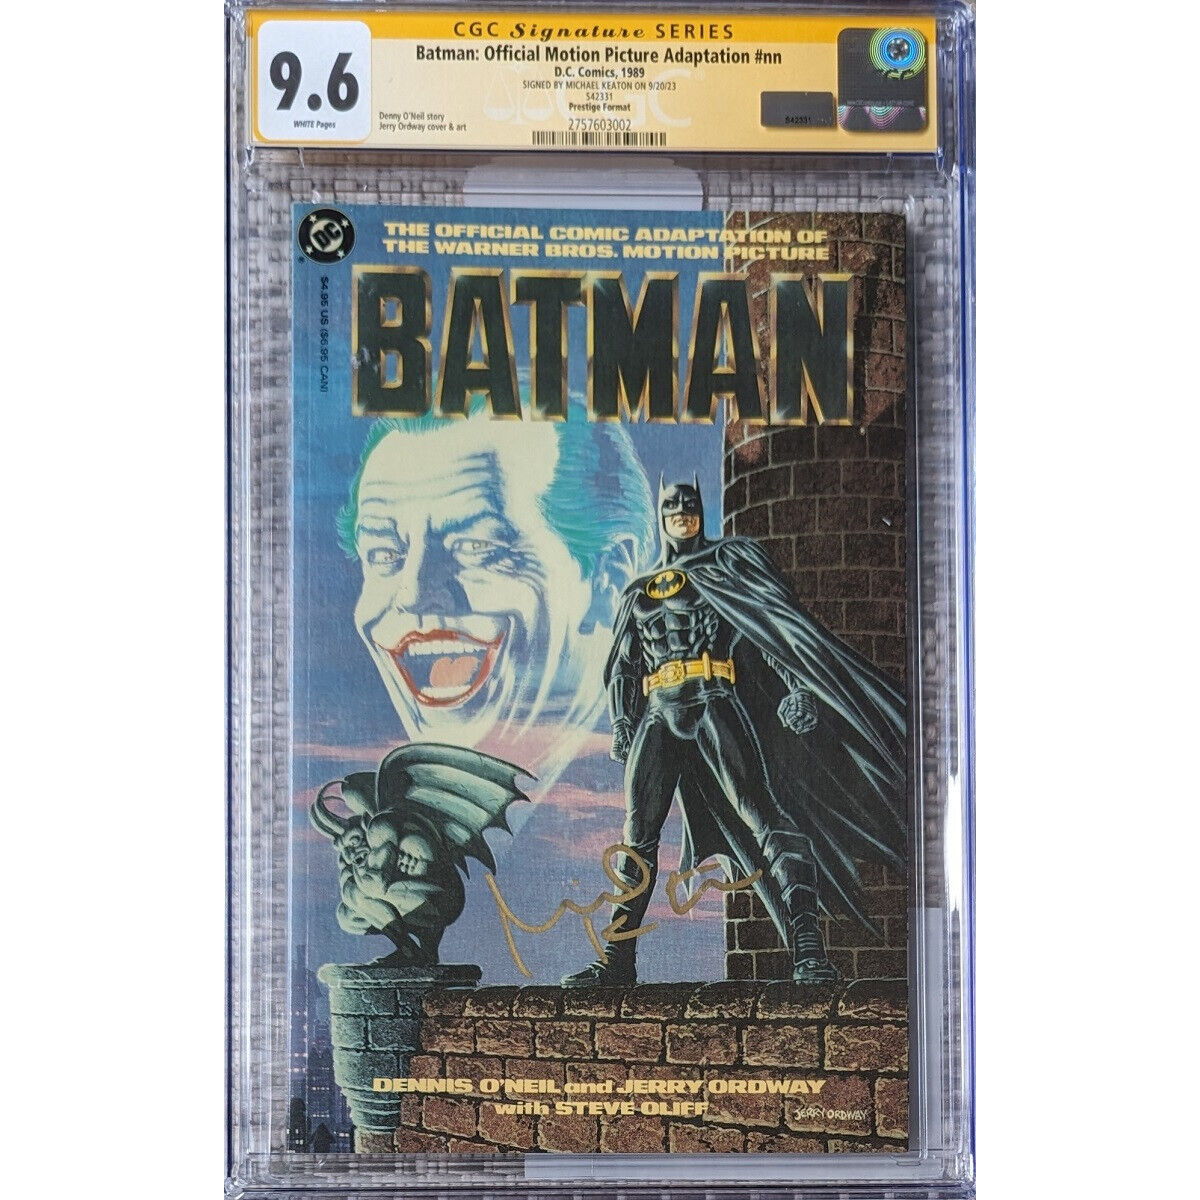 Batman Official Movie Adaptation__CGC 9.6 SS__Signed by Michael Keaton